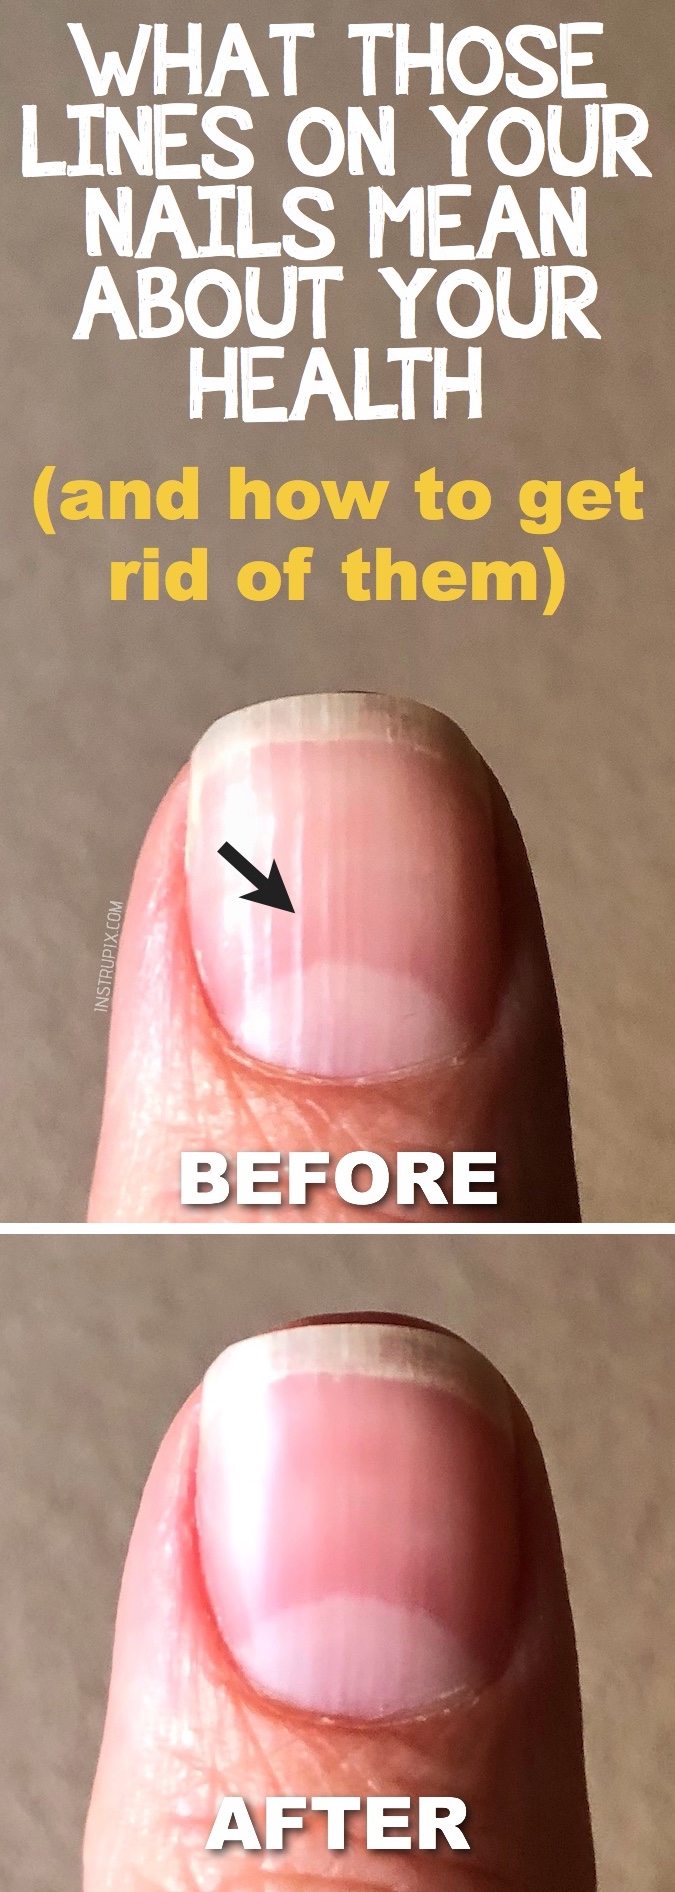 What Those Lines On Your Nails Mean About Your Health 1 